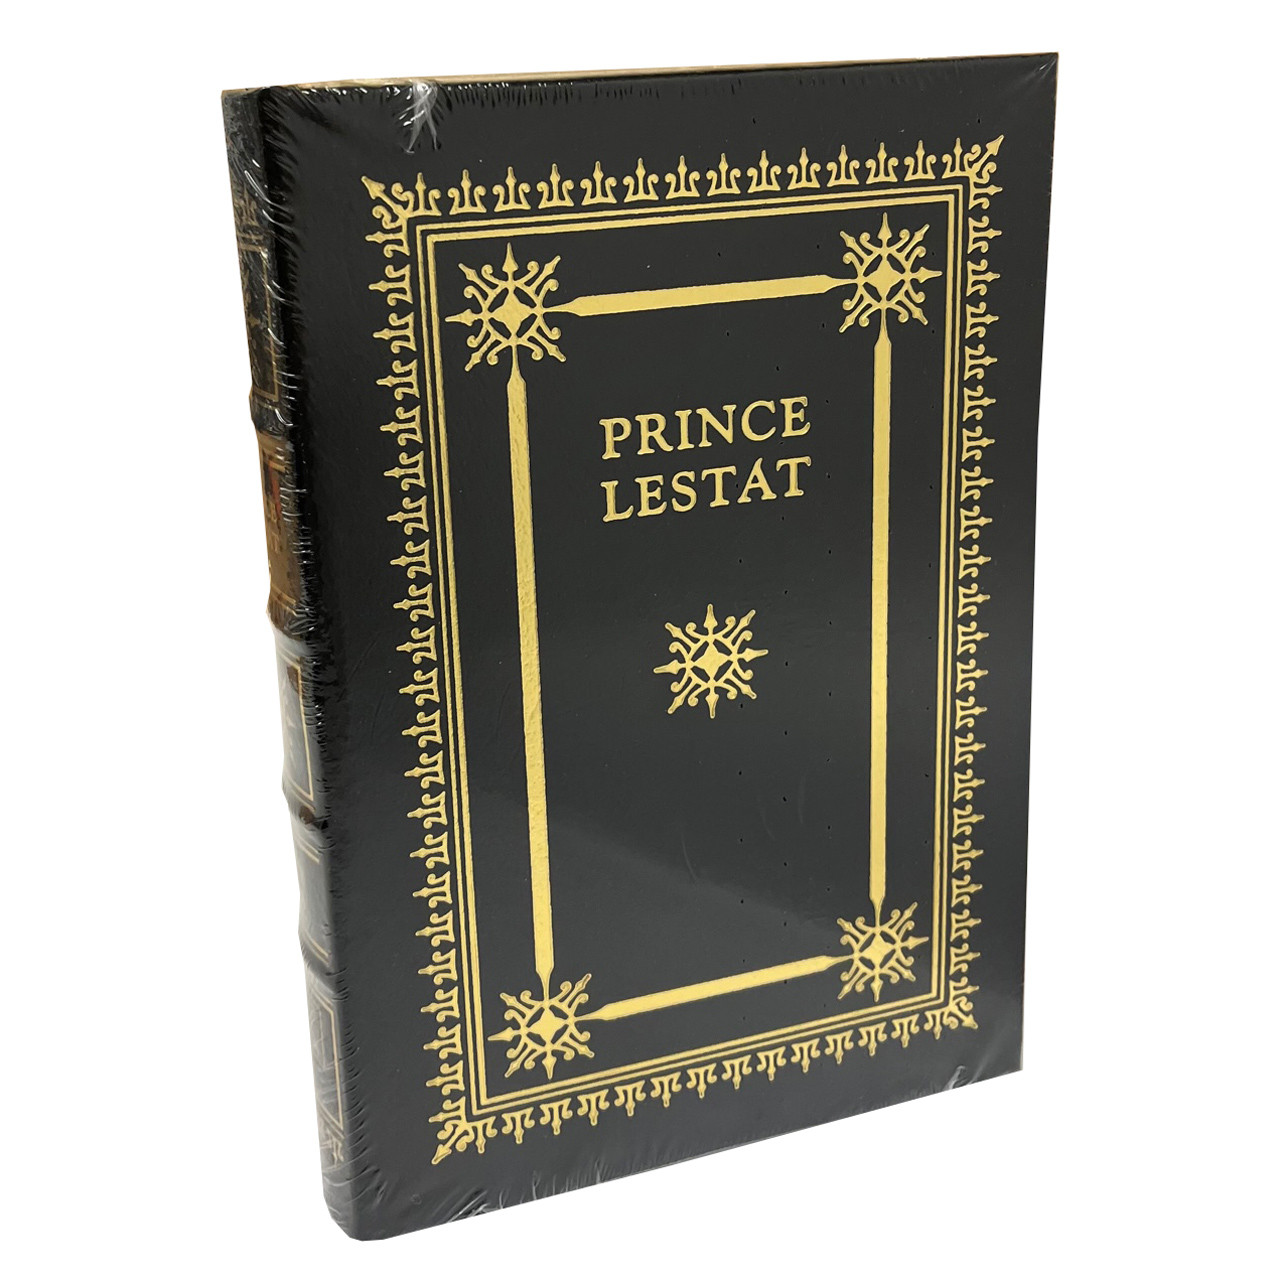 Anne Rice "Prince Lestat" Signed Limited First Edition, Leather Bound Collector's Edition of only 700 w/COA [Sealed]